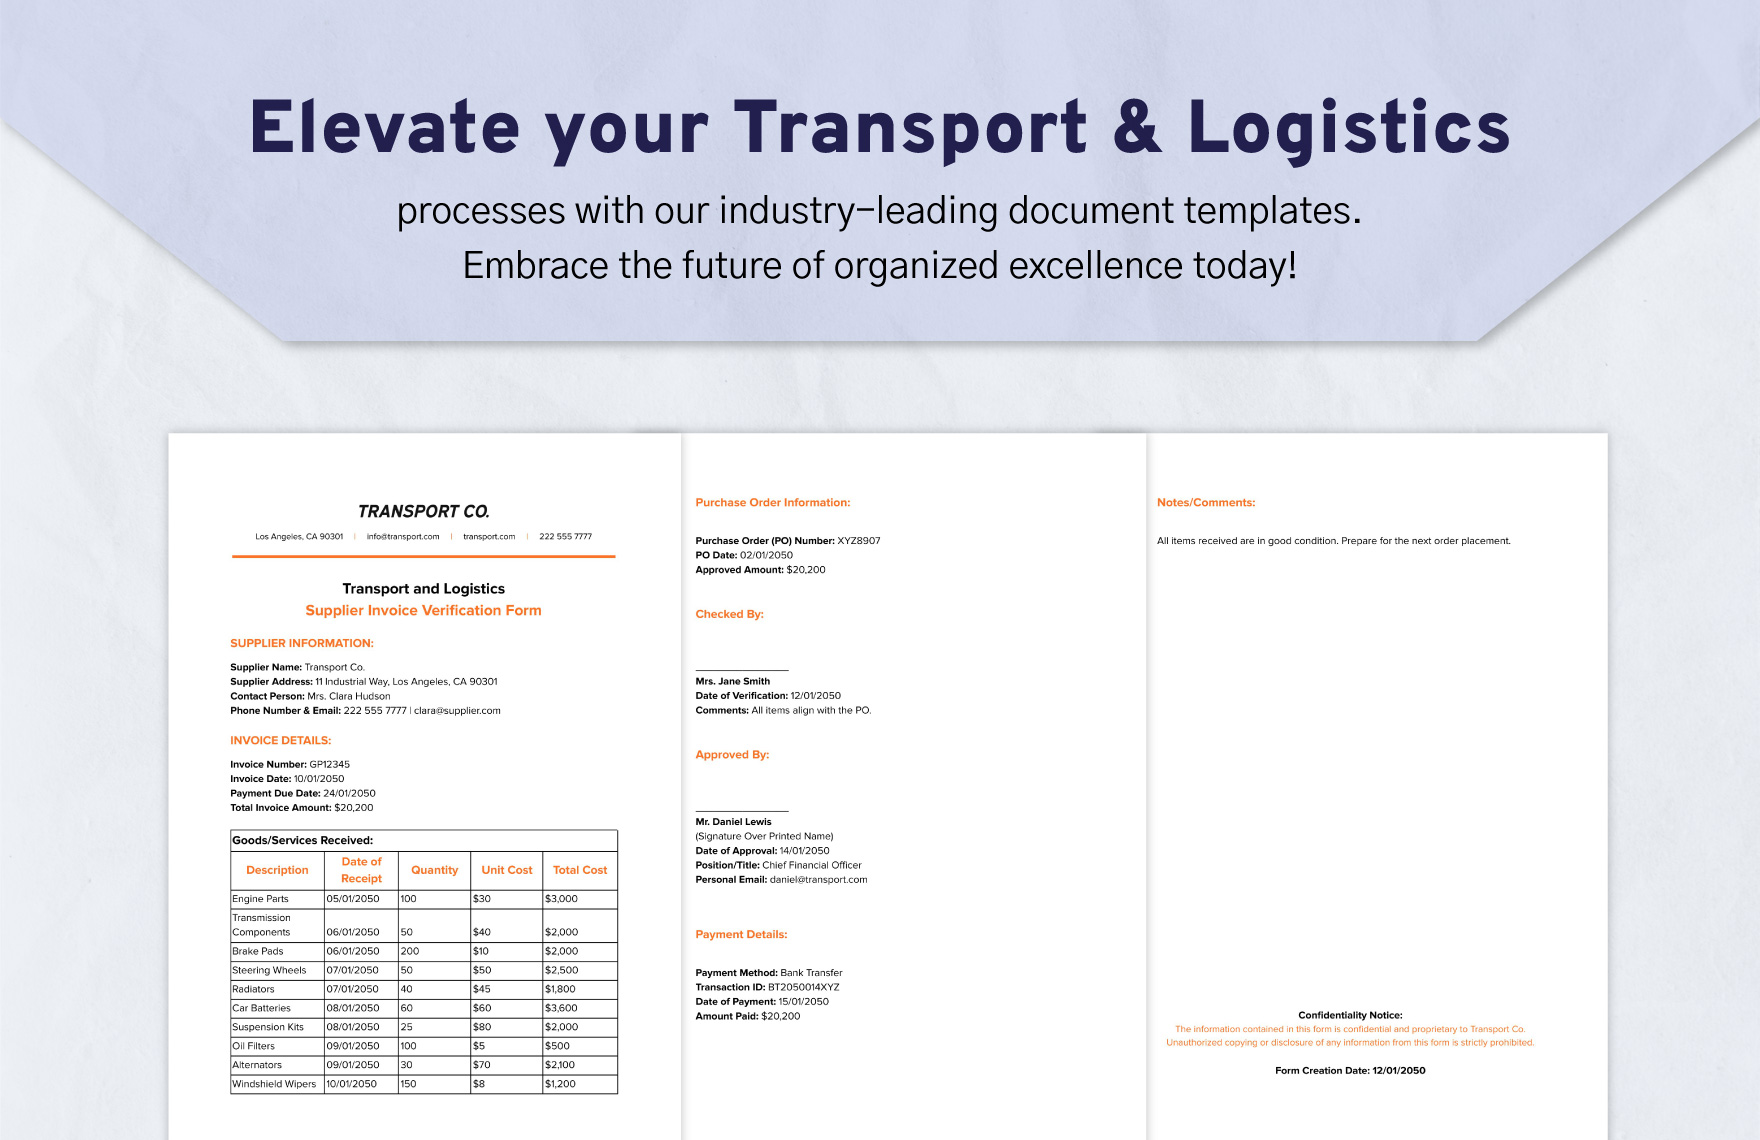 Transport and Logistics Supplier Invoice Verification Form Template